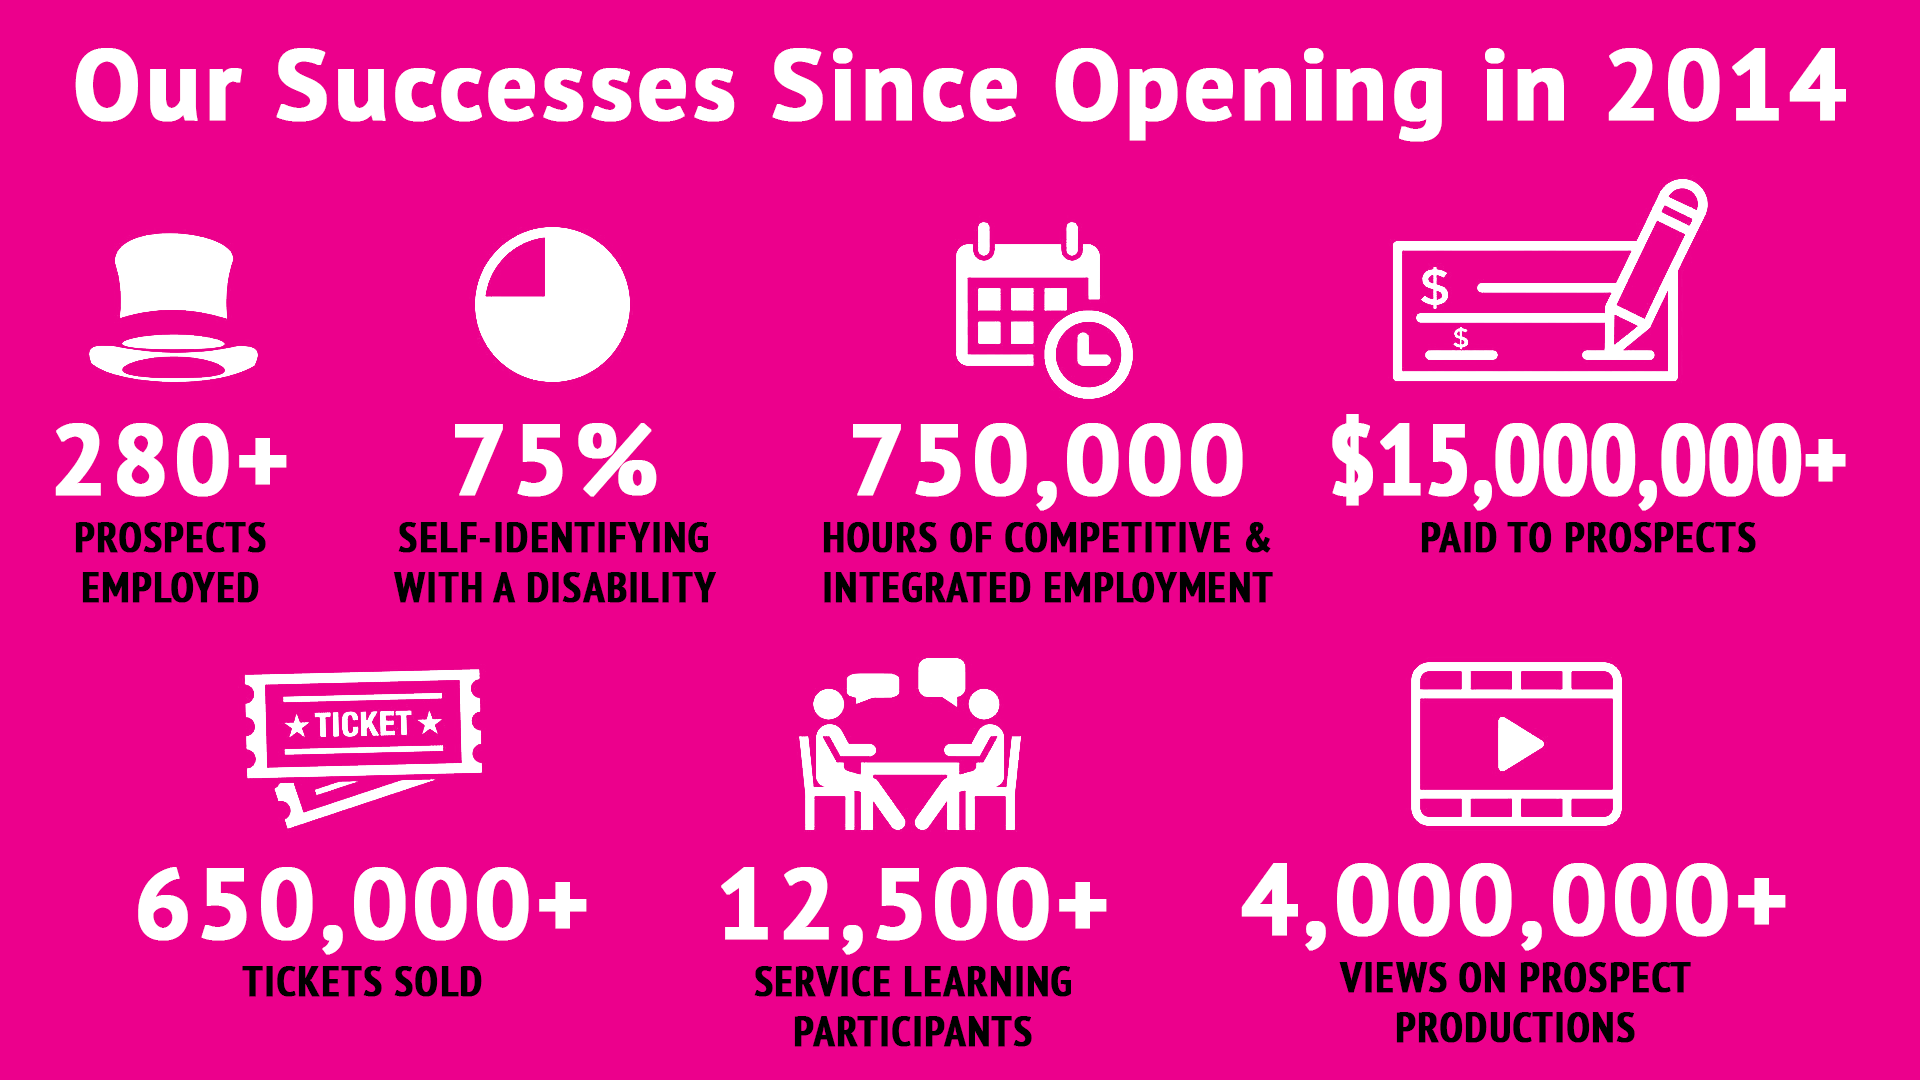 A pink graphic displays two rows of images that show what successes the Prospector Theater has had since opening in 2014. The first image is a white outline of a top hat. Below it reads, “280+ Prospects Employed.” The second image is a white pie chart. Below it reads, “75% (of employees) Identifying with Disability.” The third image is a white outline of a calendar with a clock on top of it. Blow it reads, “750,000+ Hours of Competitive and Integrated Employment.” The fourth image is a white bank check with a pen writing on it. Below it reads, “ $15,000,000+ Paid to Prospects.” The fifth image is a white outline of two movie tickets on top of each other. Below it reads, “650,000 Tickets Sold.” The sixth image is a white outline of two people sitting at a table talking with each other. Below it reads, “12,500+ Service Learning Participants.” The last image is a white outline of a film strip with a white play button in the middle. Below it reads, “4,000,000+ Production Views.”